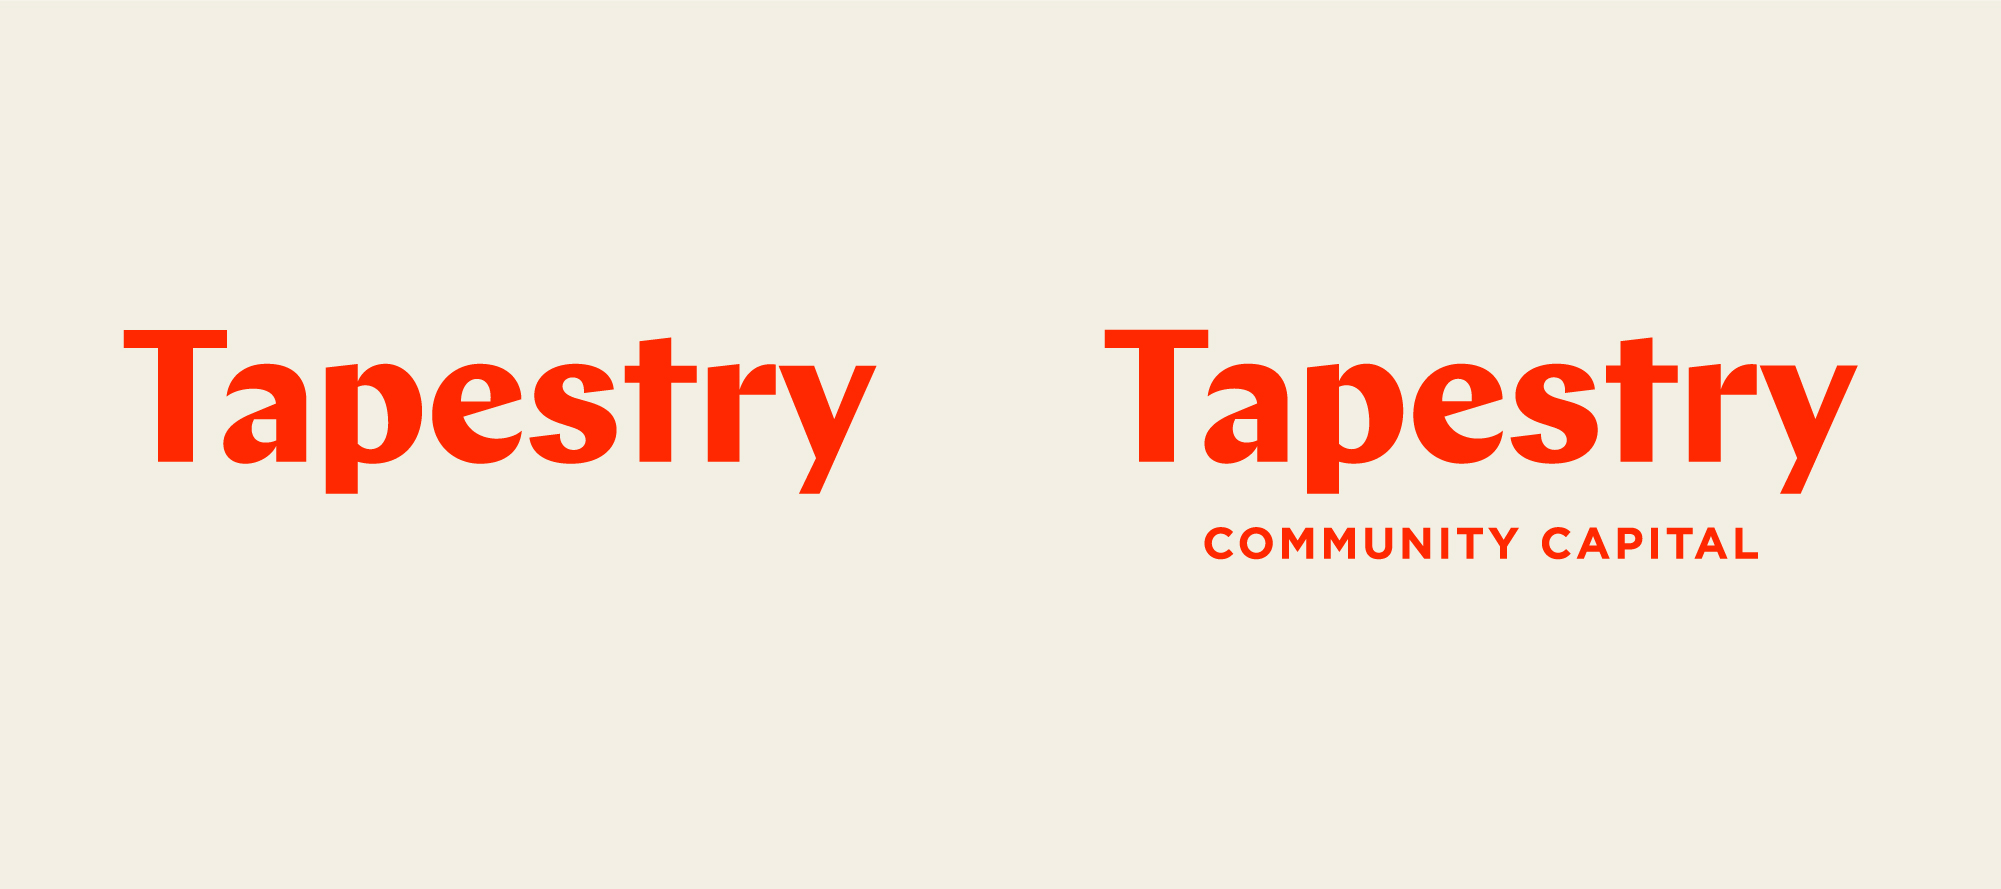 The two versions of Tapestry Community Capital’s nonprofit logo side by side: the full name and just the word “Tapestry.”